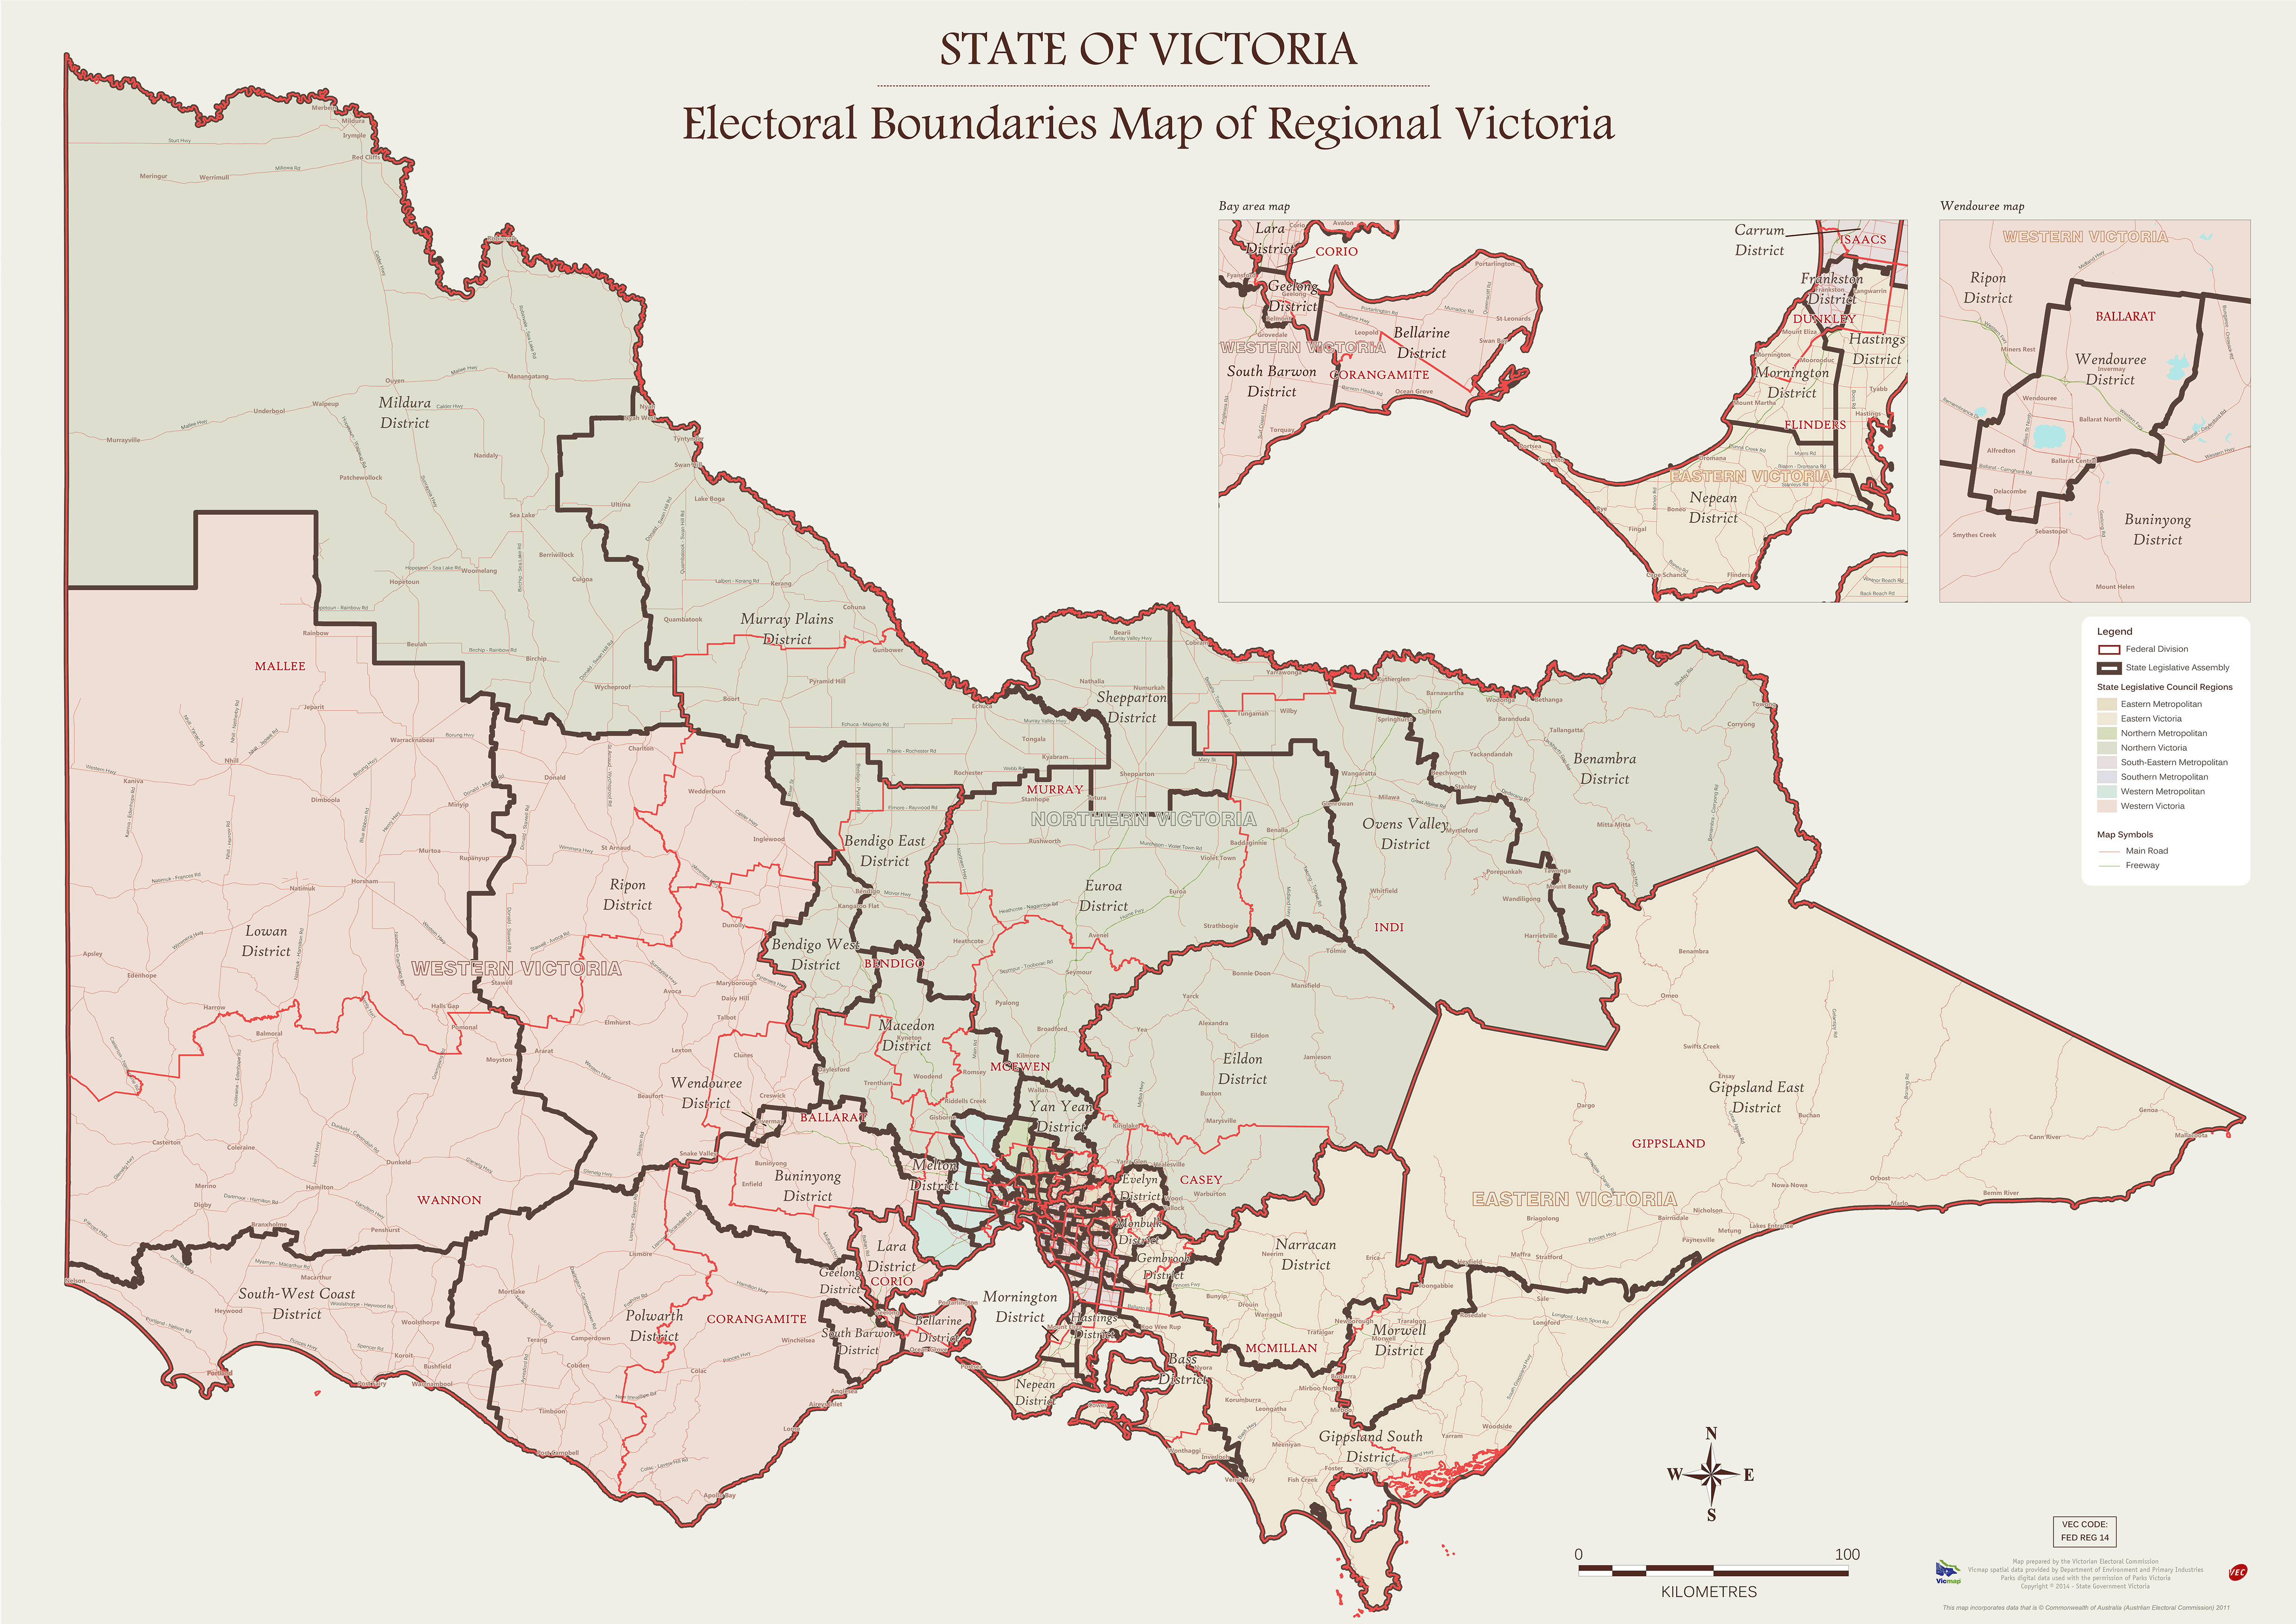 Download Boundary Maps Victorian Electoral Commission